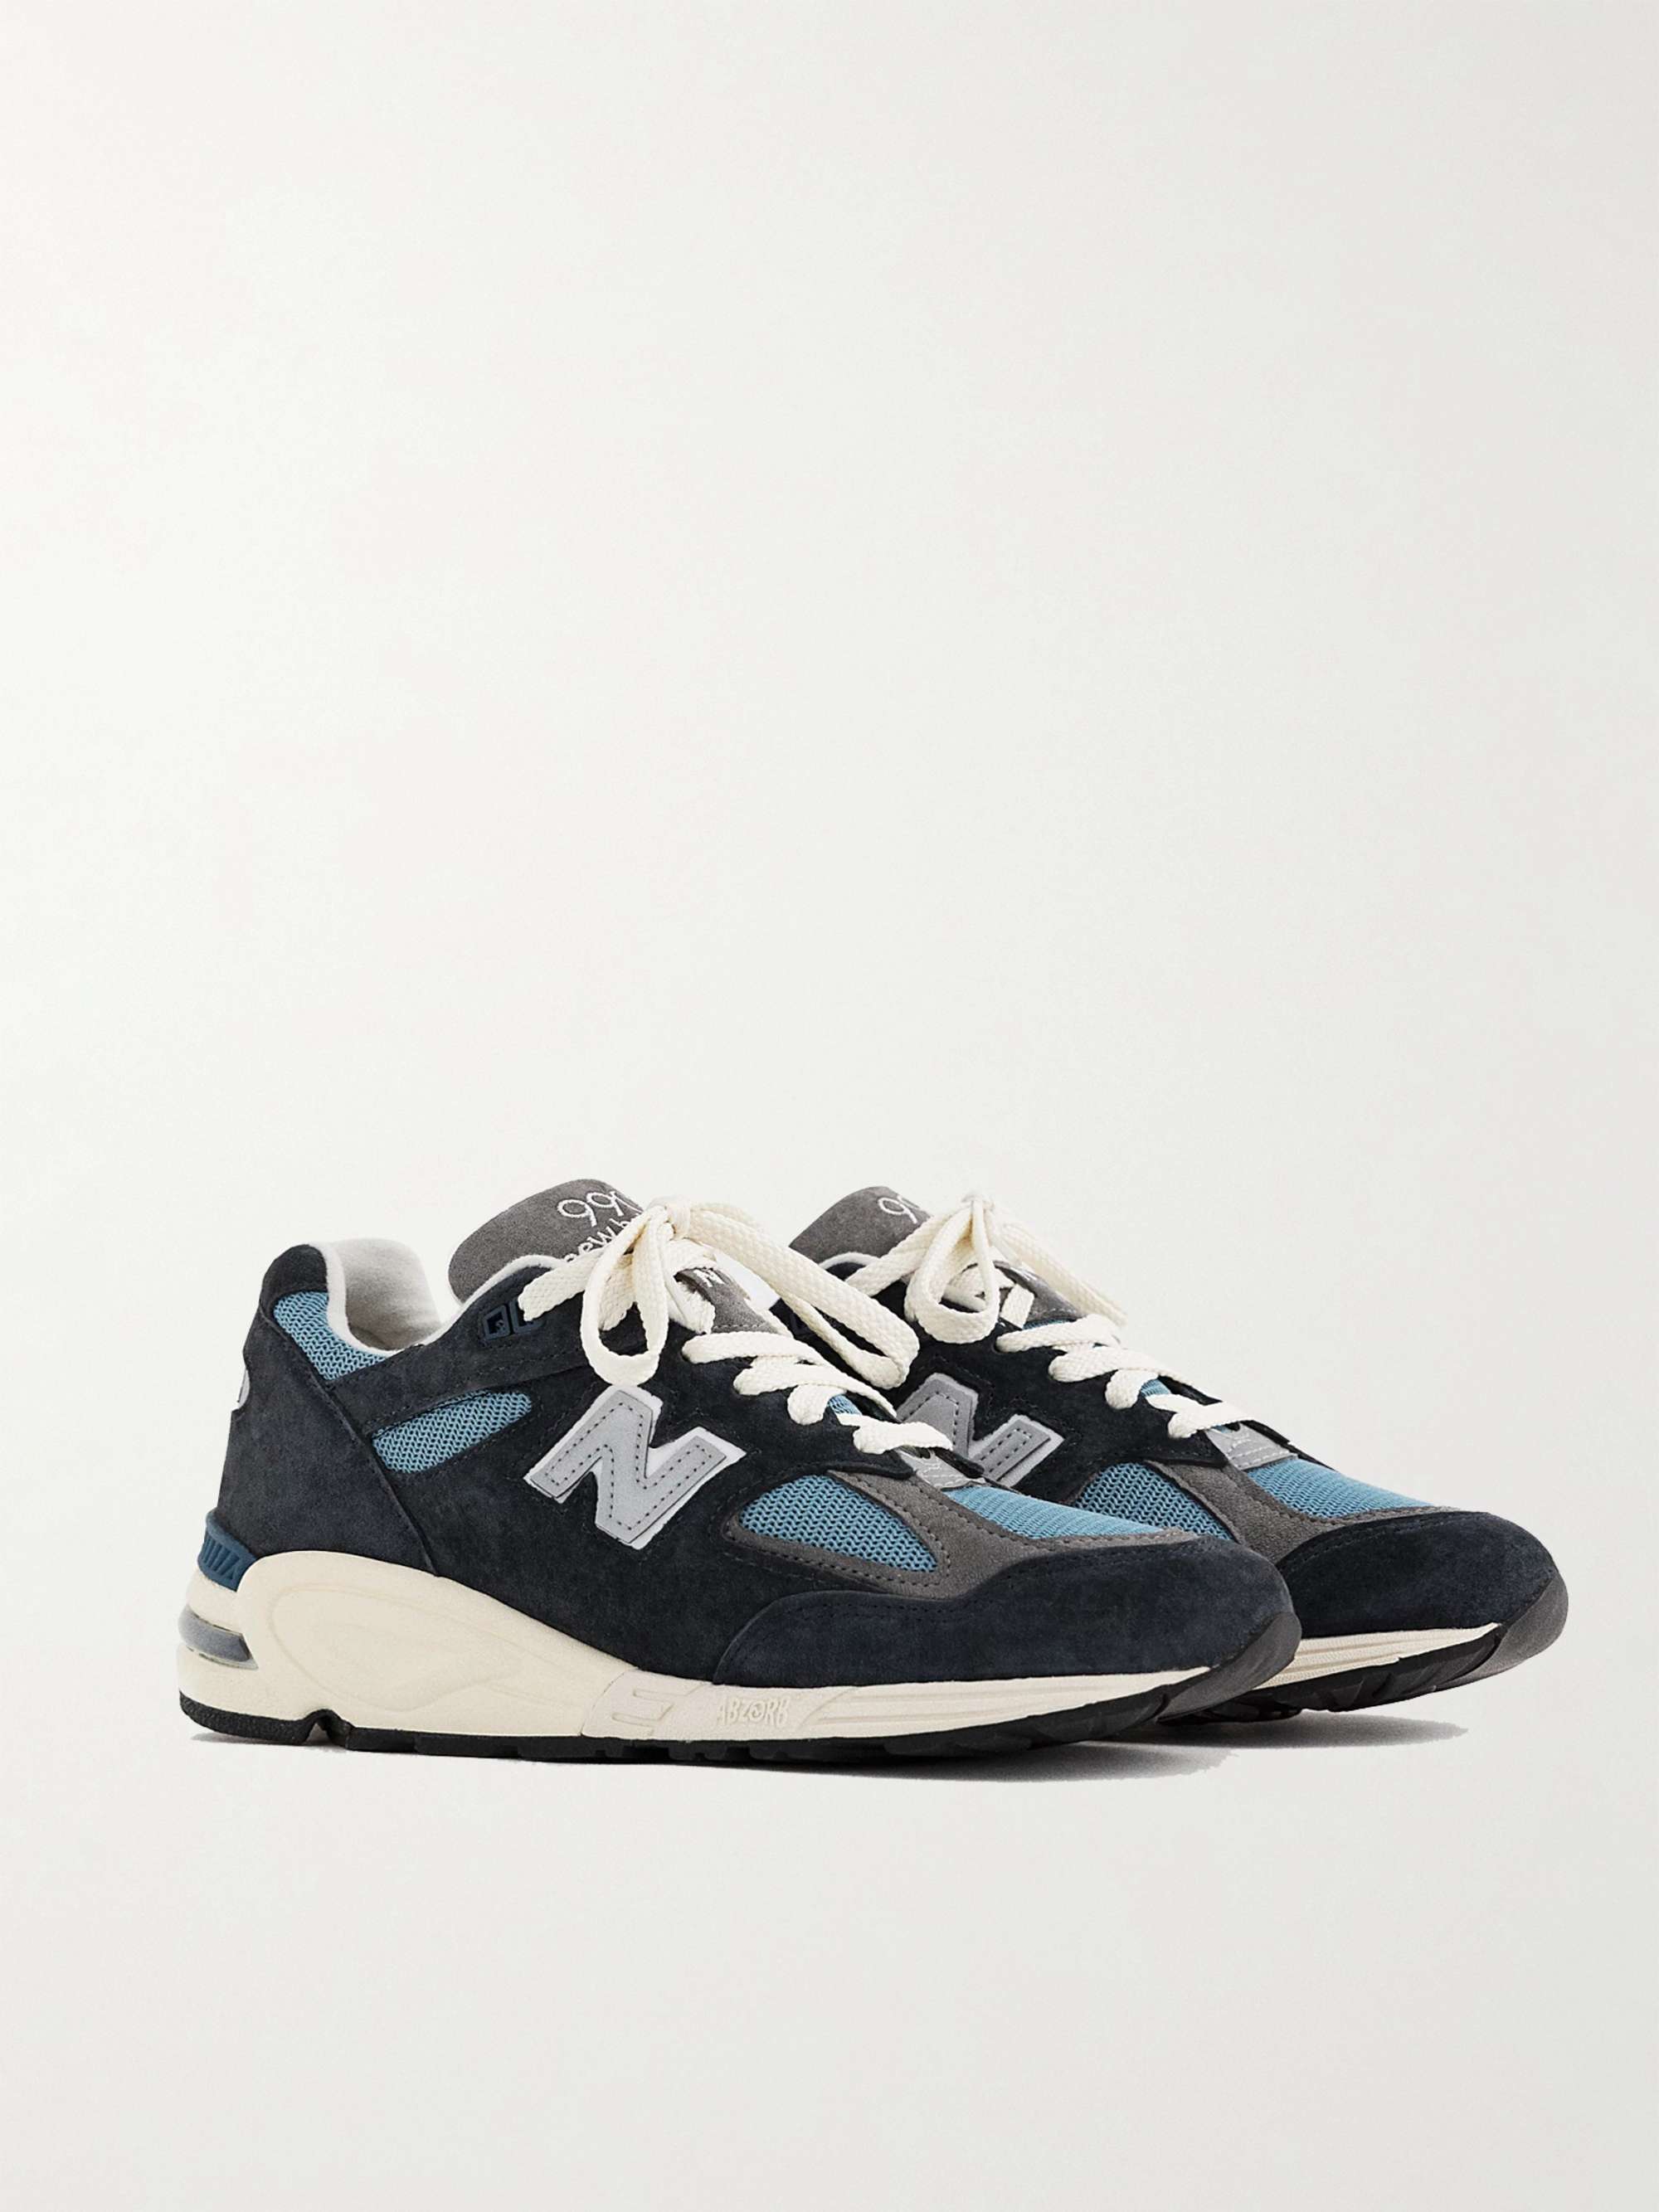 Navy MADE in USA 990v2 Suede and Mesh Sneakers | NEW BALANCE | MR PORTER